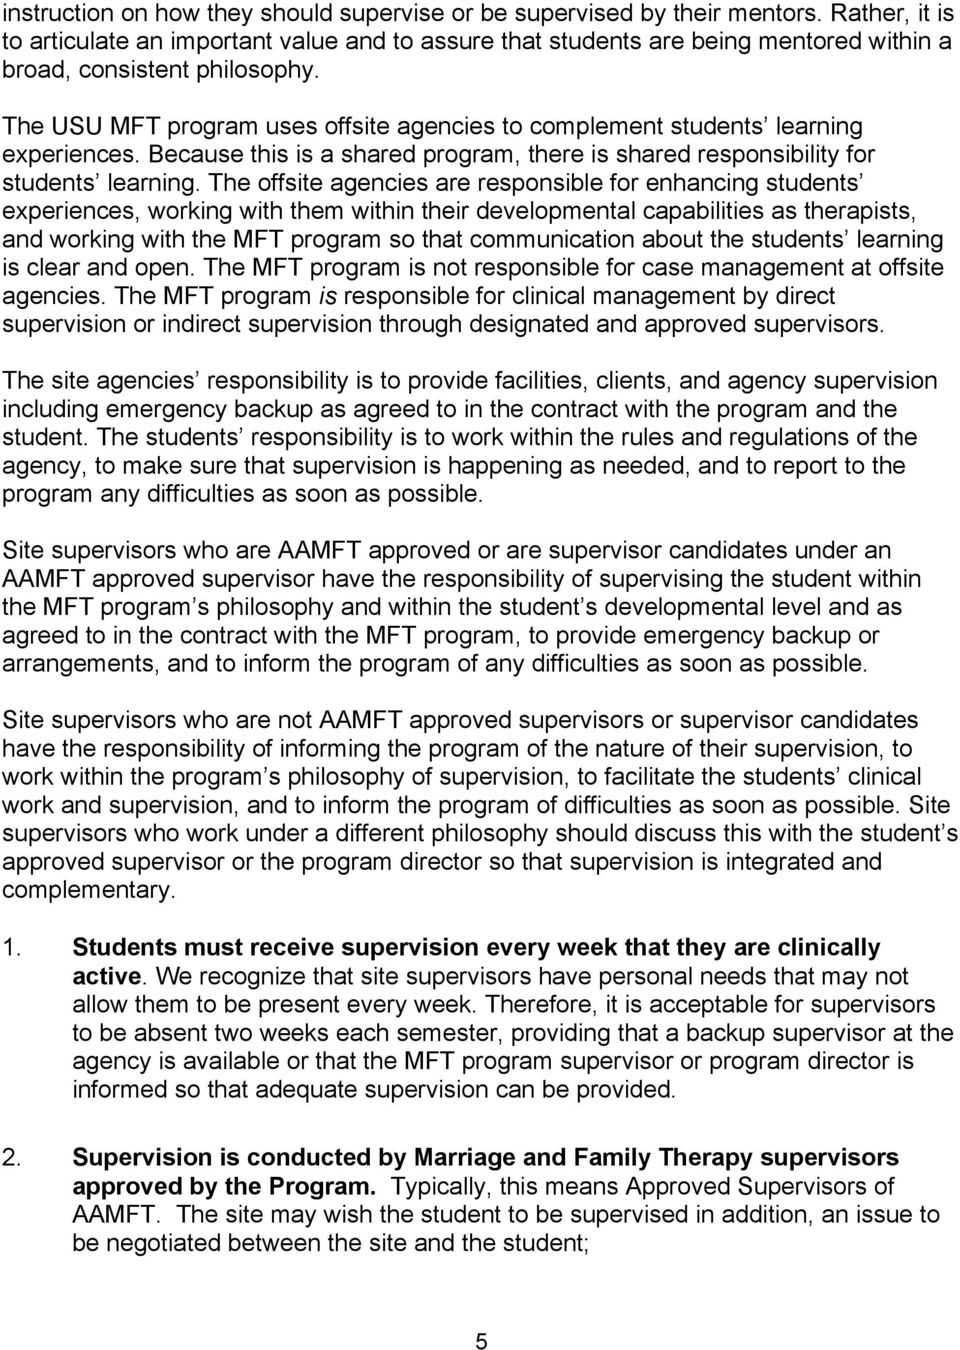 The USU MFT program uses offsite agencies to complement students learning experiences. Because this is a shared program, there is shared responsibility for students learning.